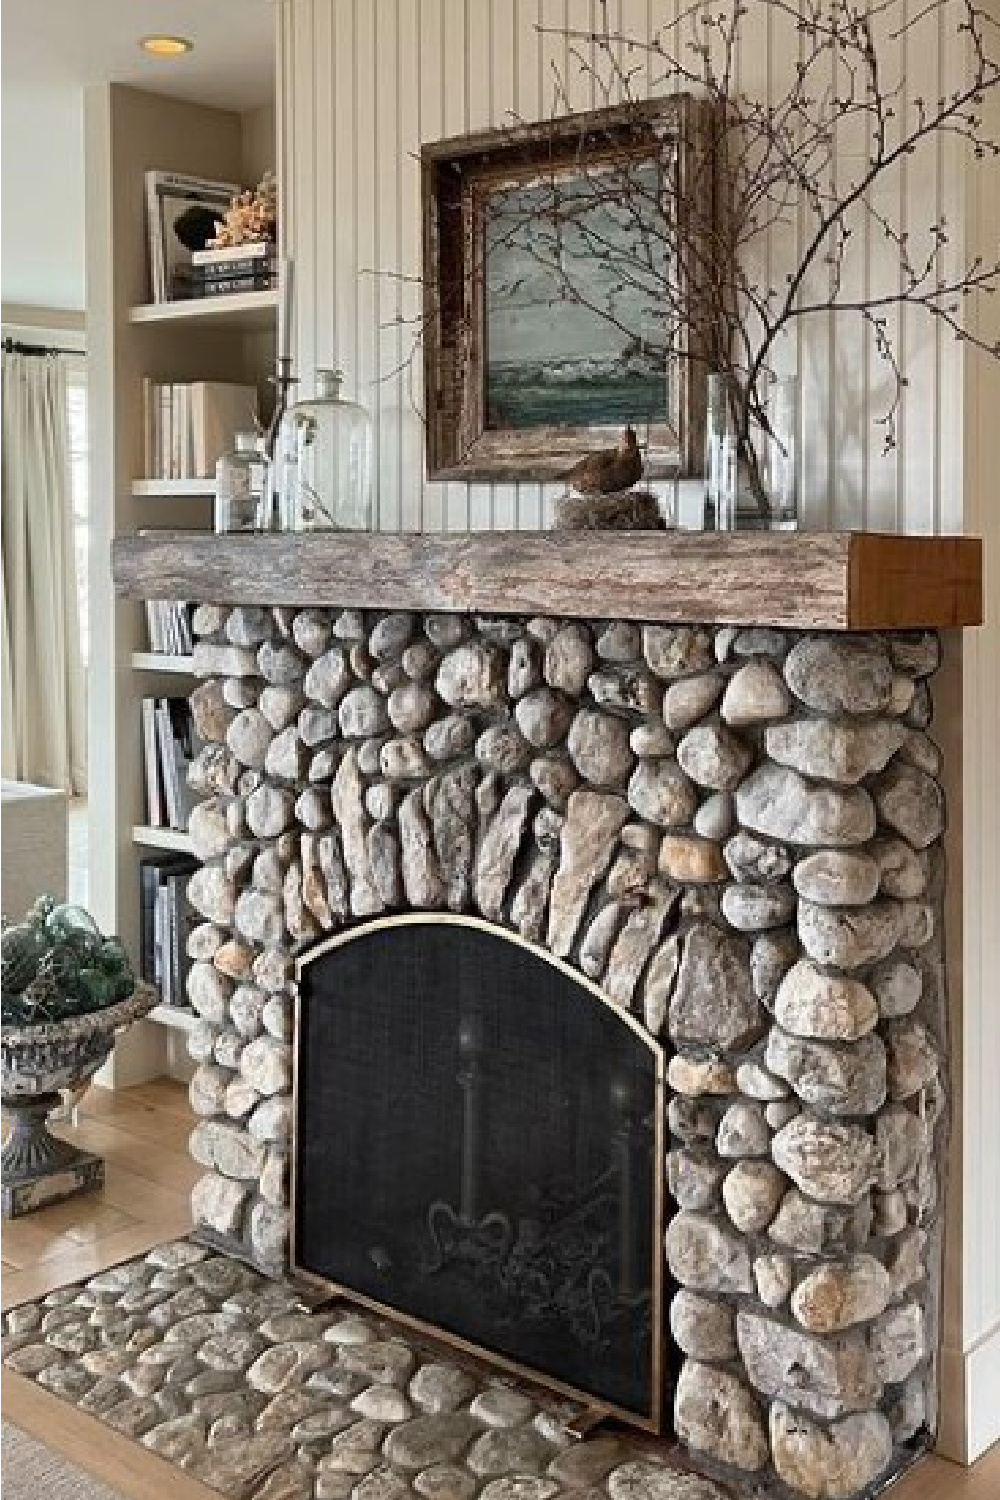 Rustic stone fireplace in a beautiful Cape Cod cottage - @oldsilvershed. #cottagestyle #rusticfireplace